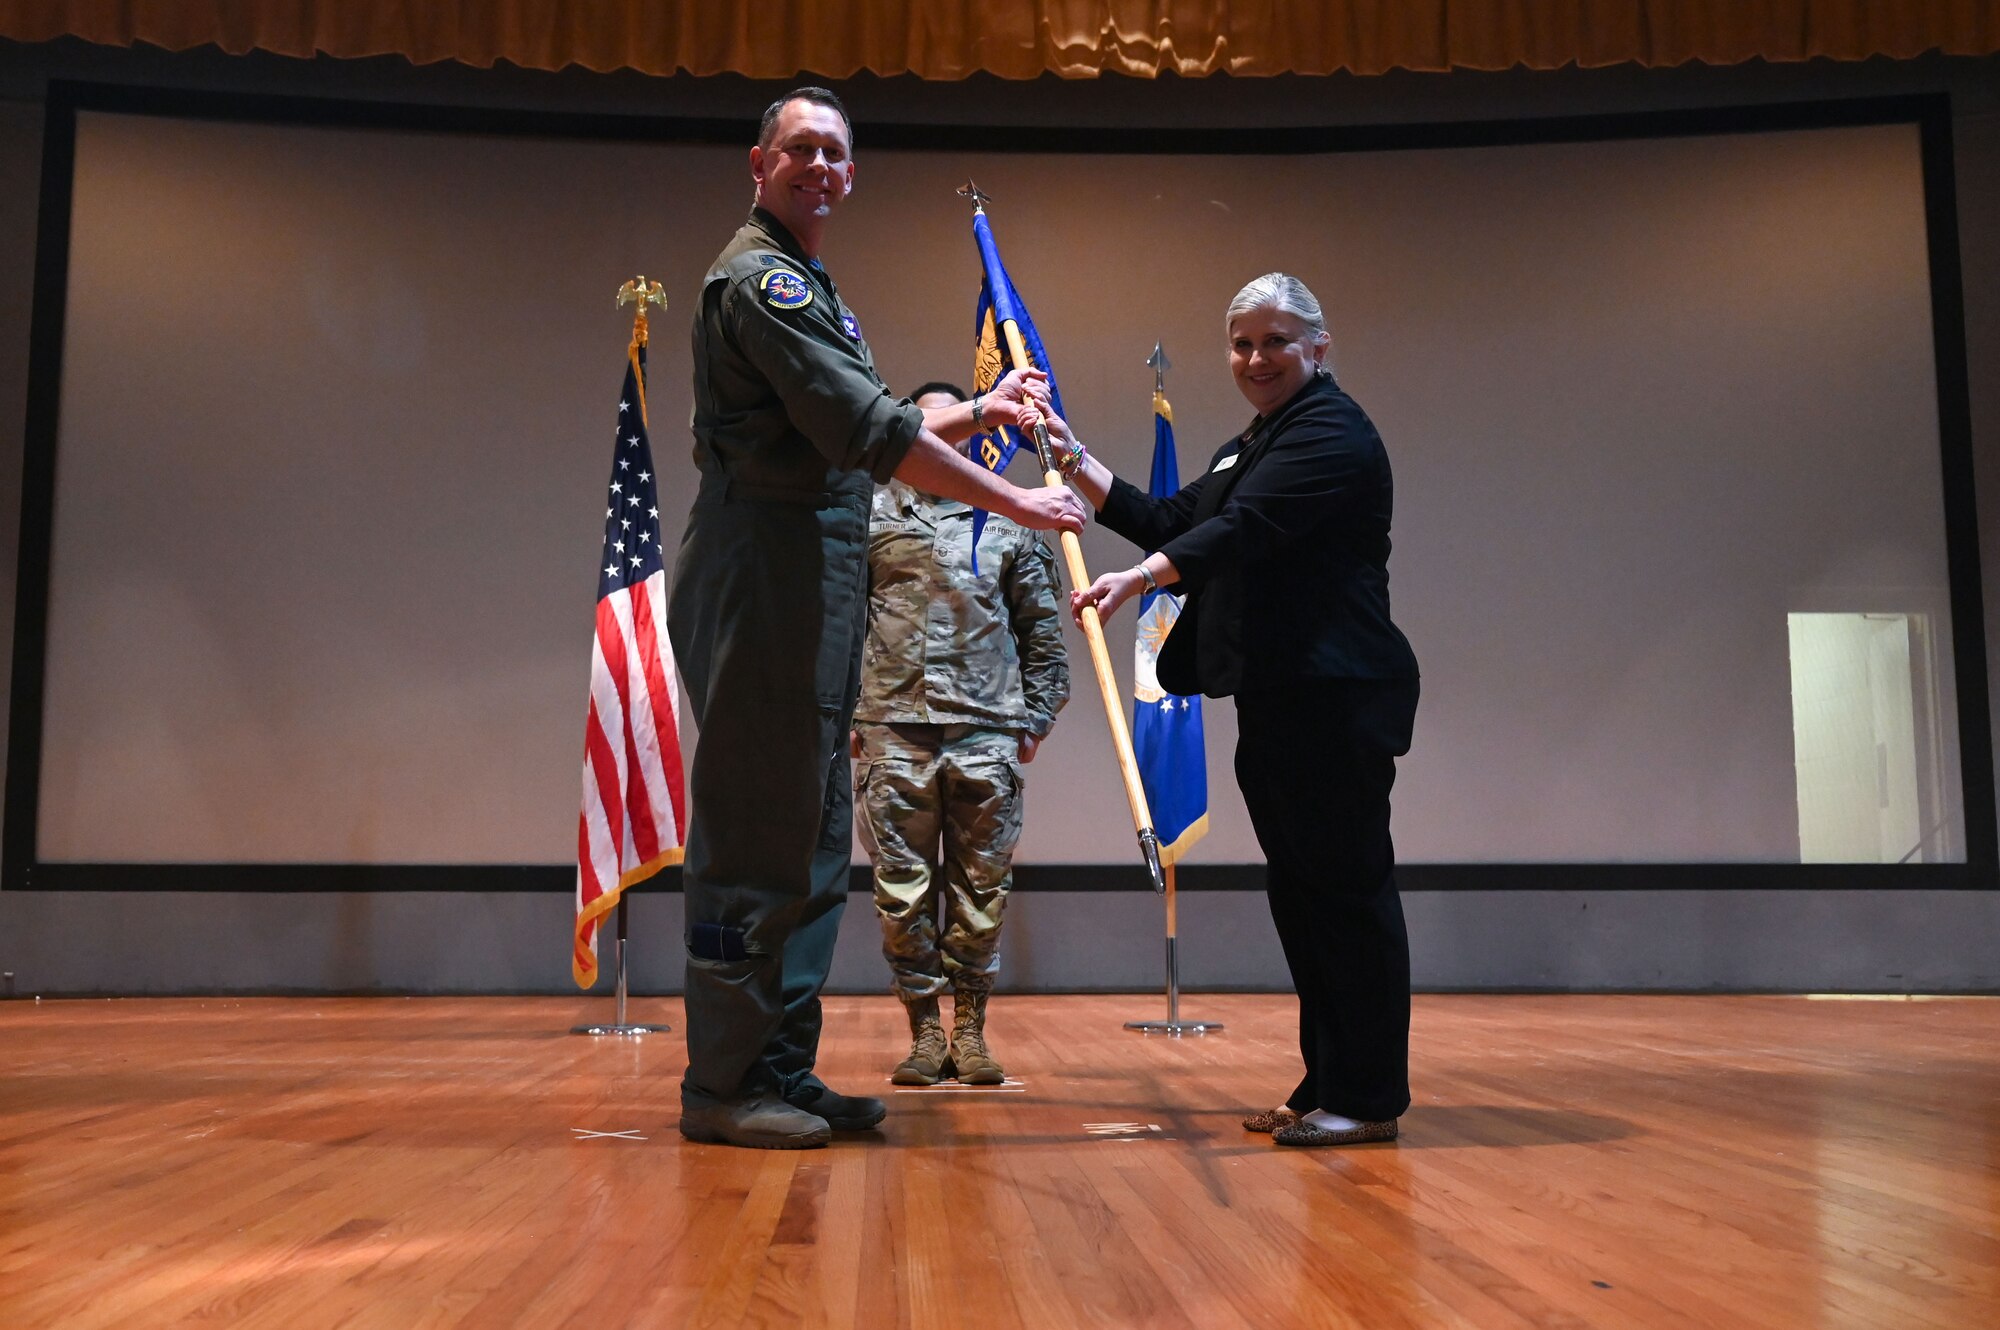 U.S. Air Force Lt. Col. Thomas Metzger, 87th Electronic Warfare Squadron commander, inducts Amy Klugh, the Bluewater Elementary Principal in Niceville and serves on the Niceville and Valparaiso Chamber of Commerce, during the wing’s first Honorary Commander Induction ceremony, at Eglin Air Force Base, Fla., Dec. 1, 2023. Honorary Commanders serve as the liaison between the 350th Spectrum Warfare Wing and the surrounding community by maintaining strong relations through mutually beneficial professional partnership. (U.S. Air Force photo by Staff Sgt. Ericka A. Woolever)